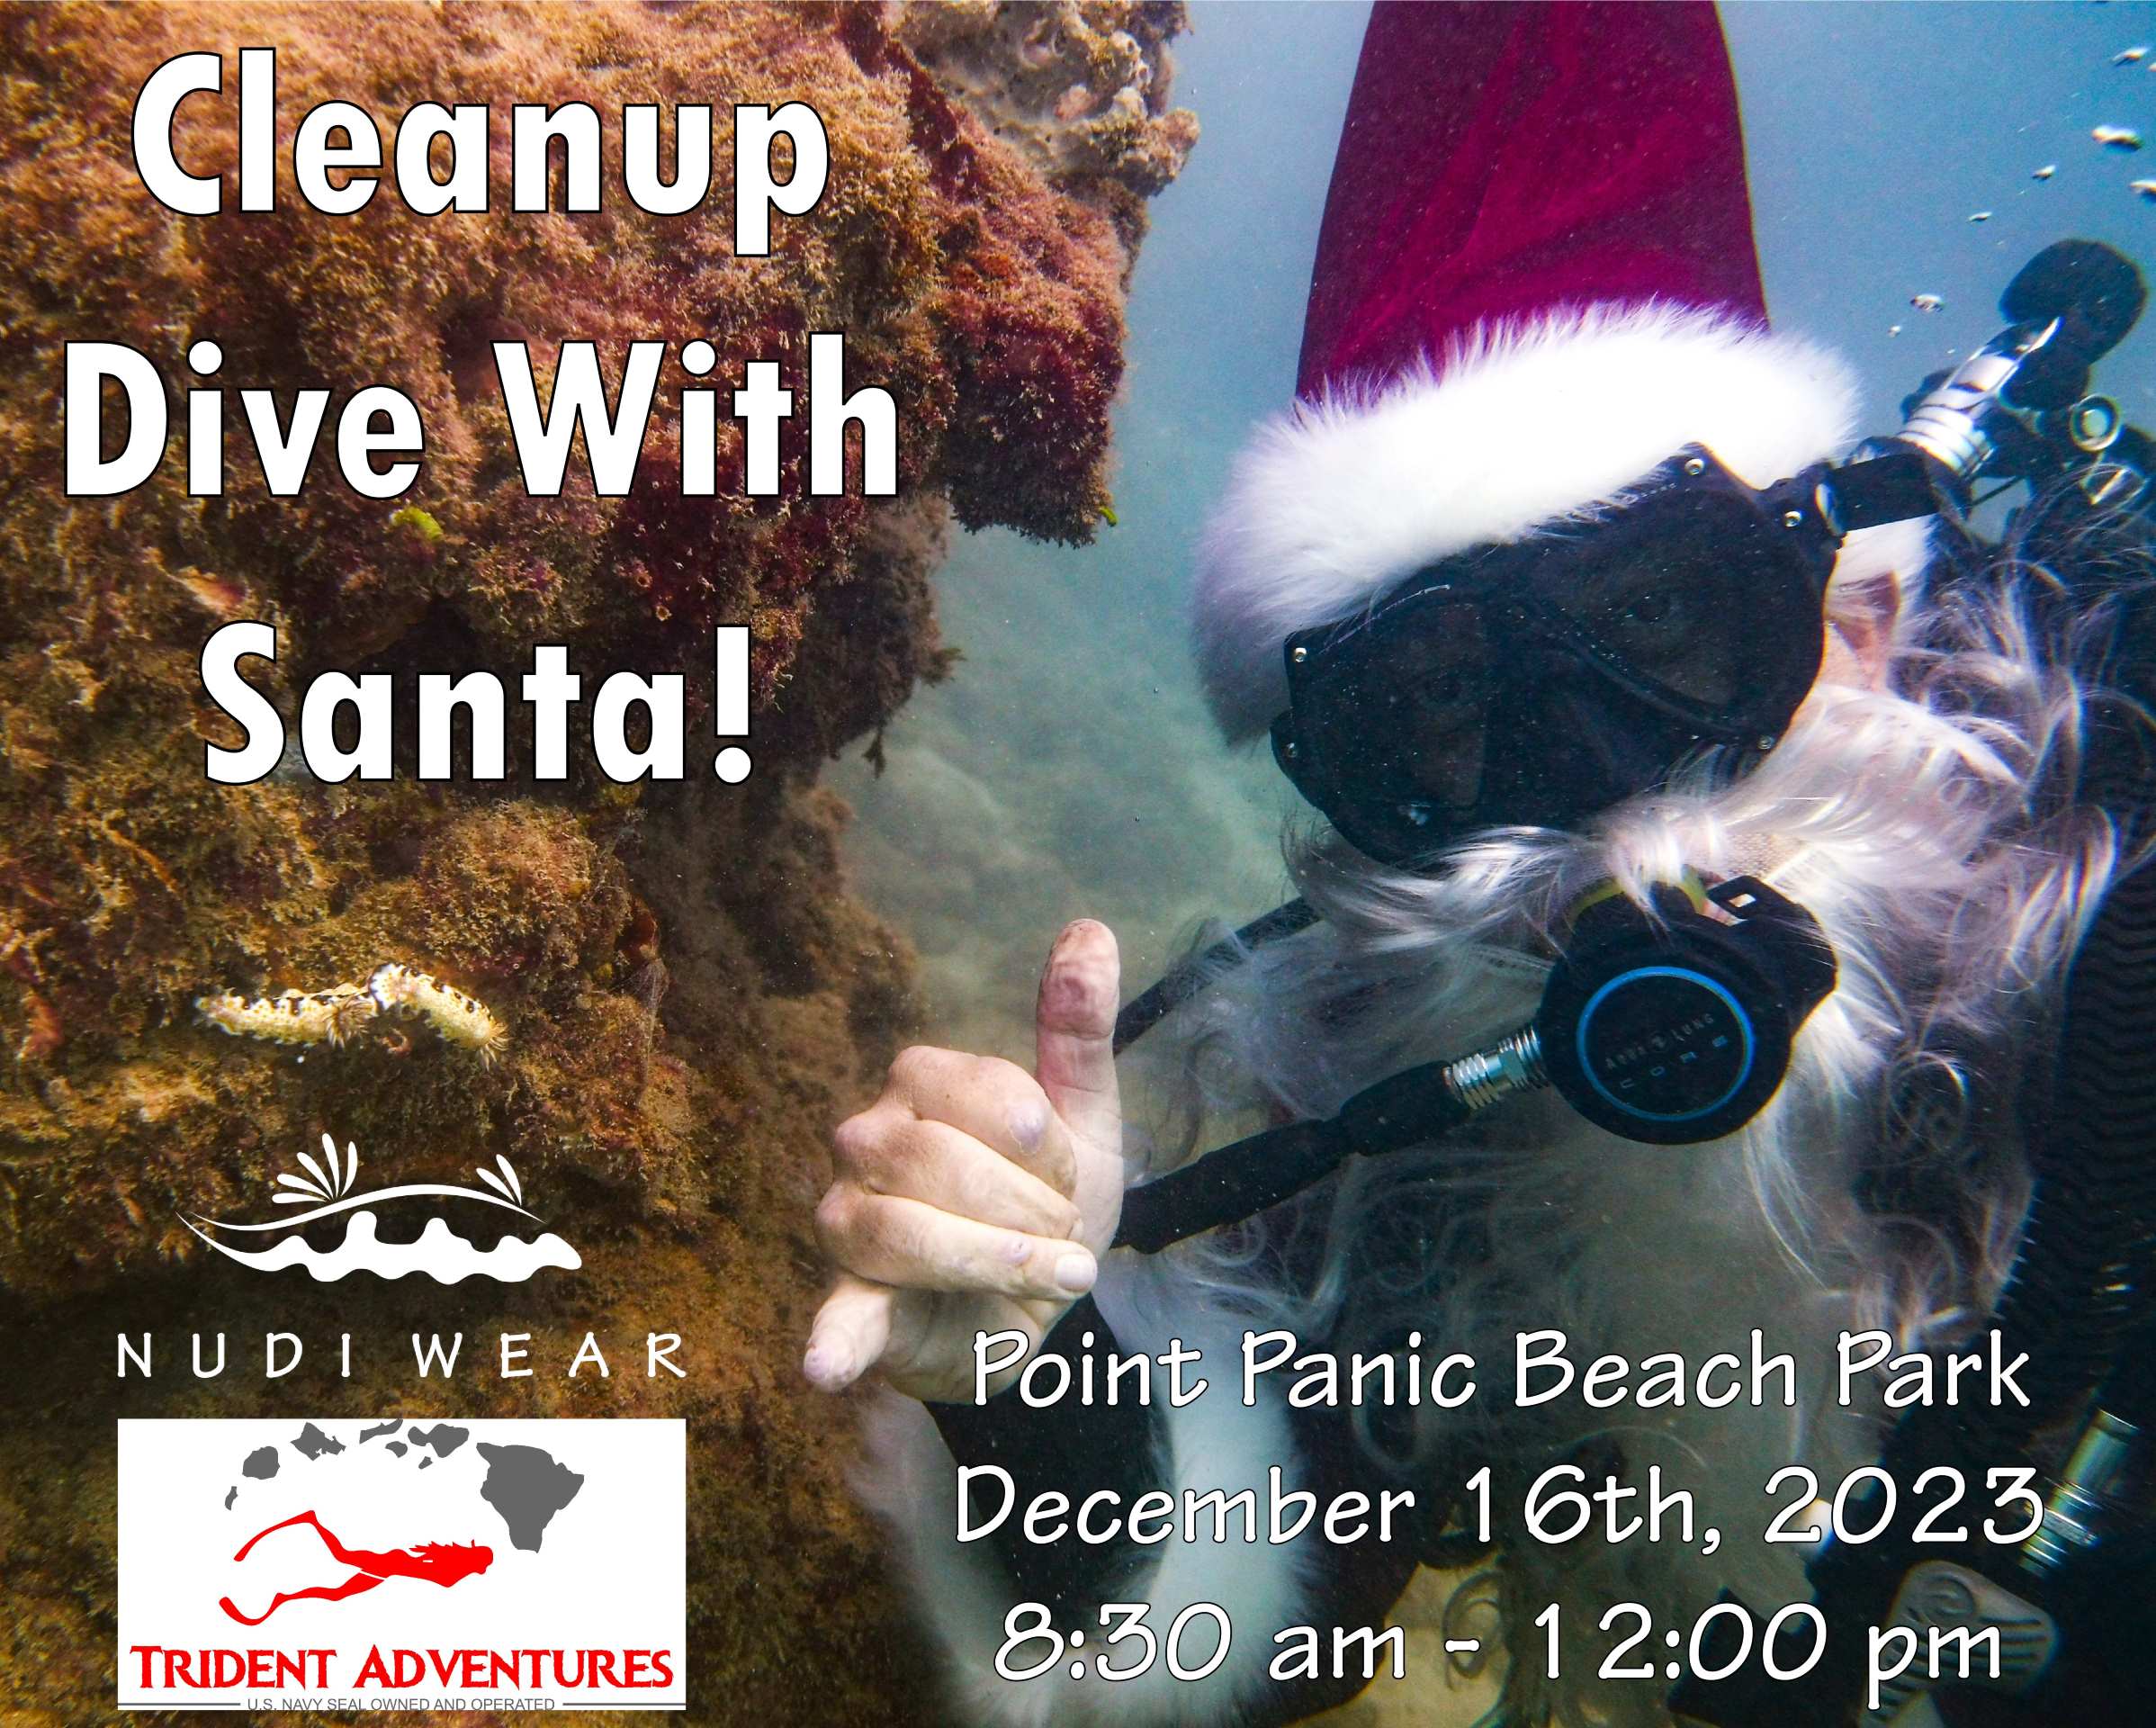 Nudi Wear & Trident Adventures Cleanup Dive With Santa Event invite